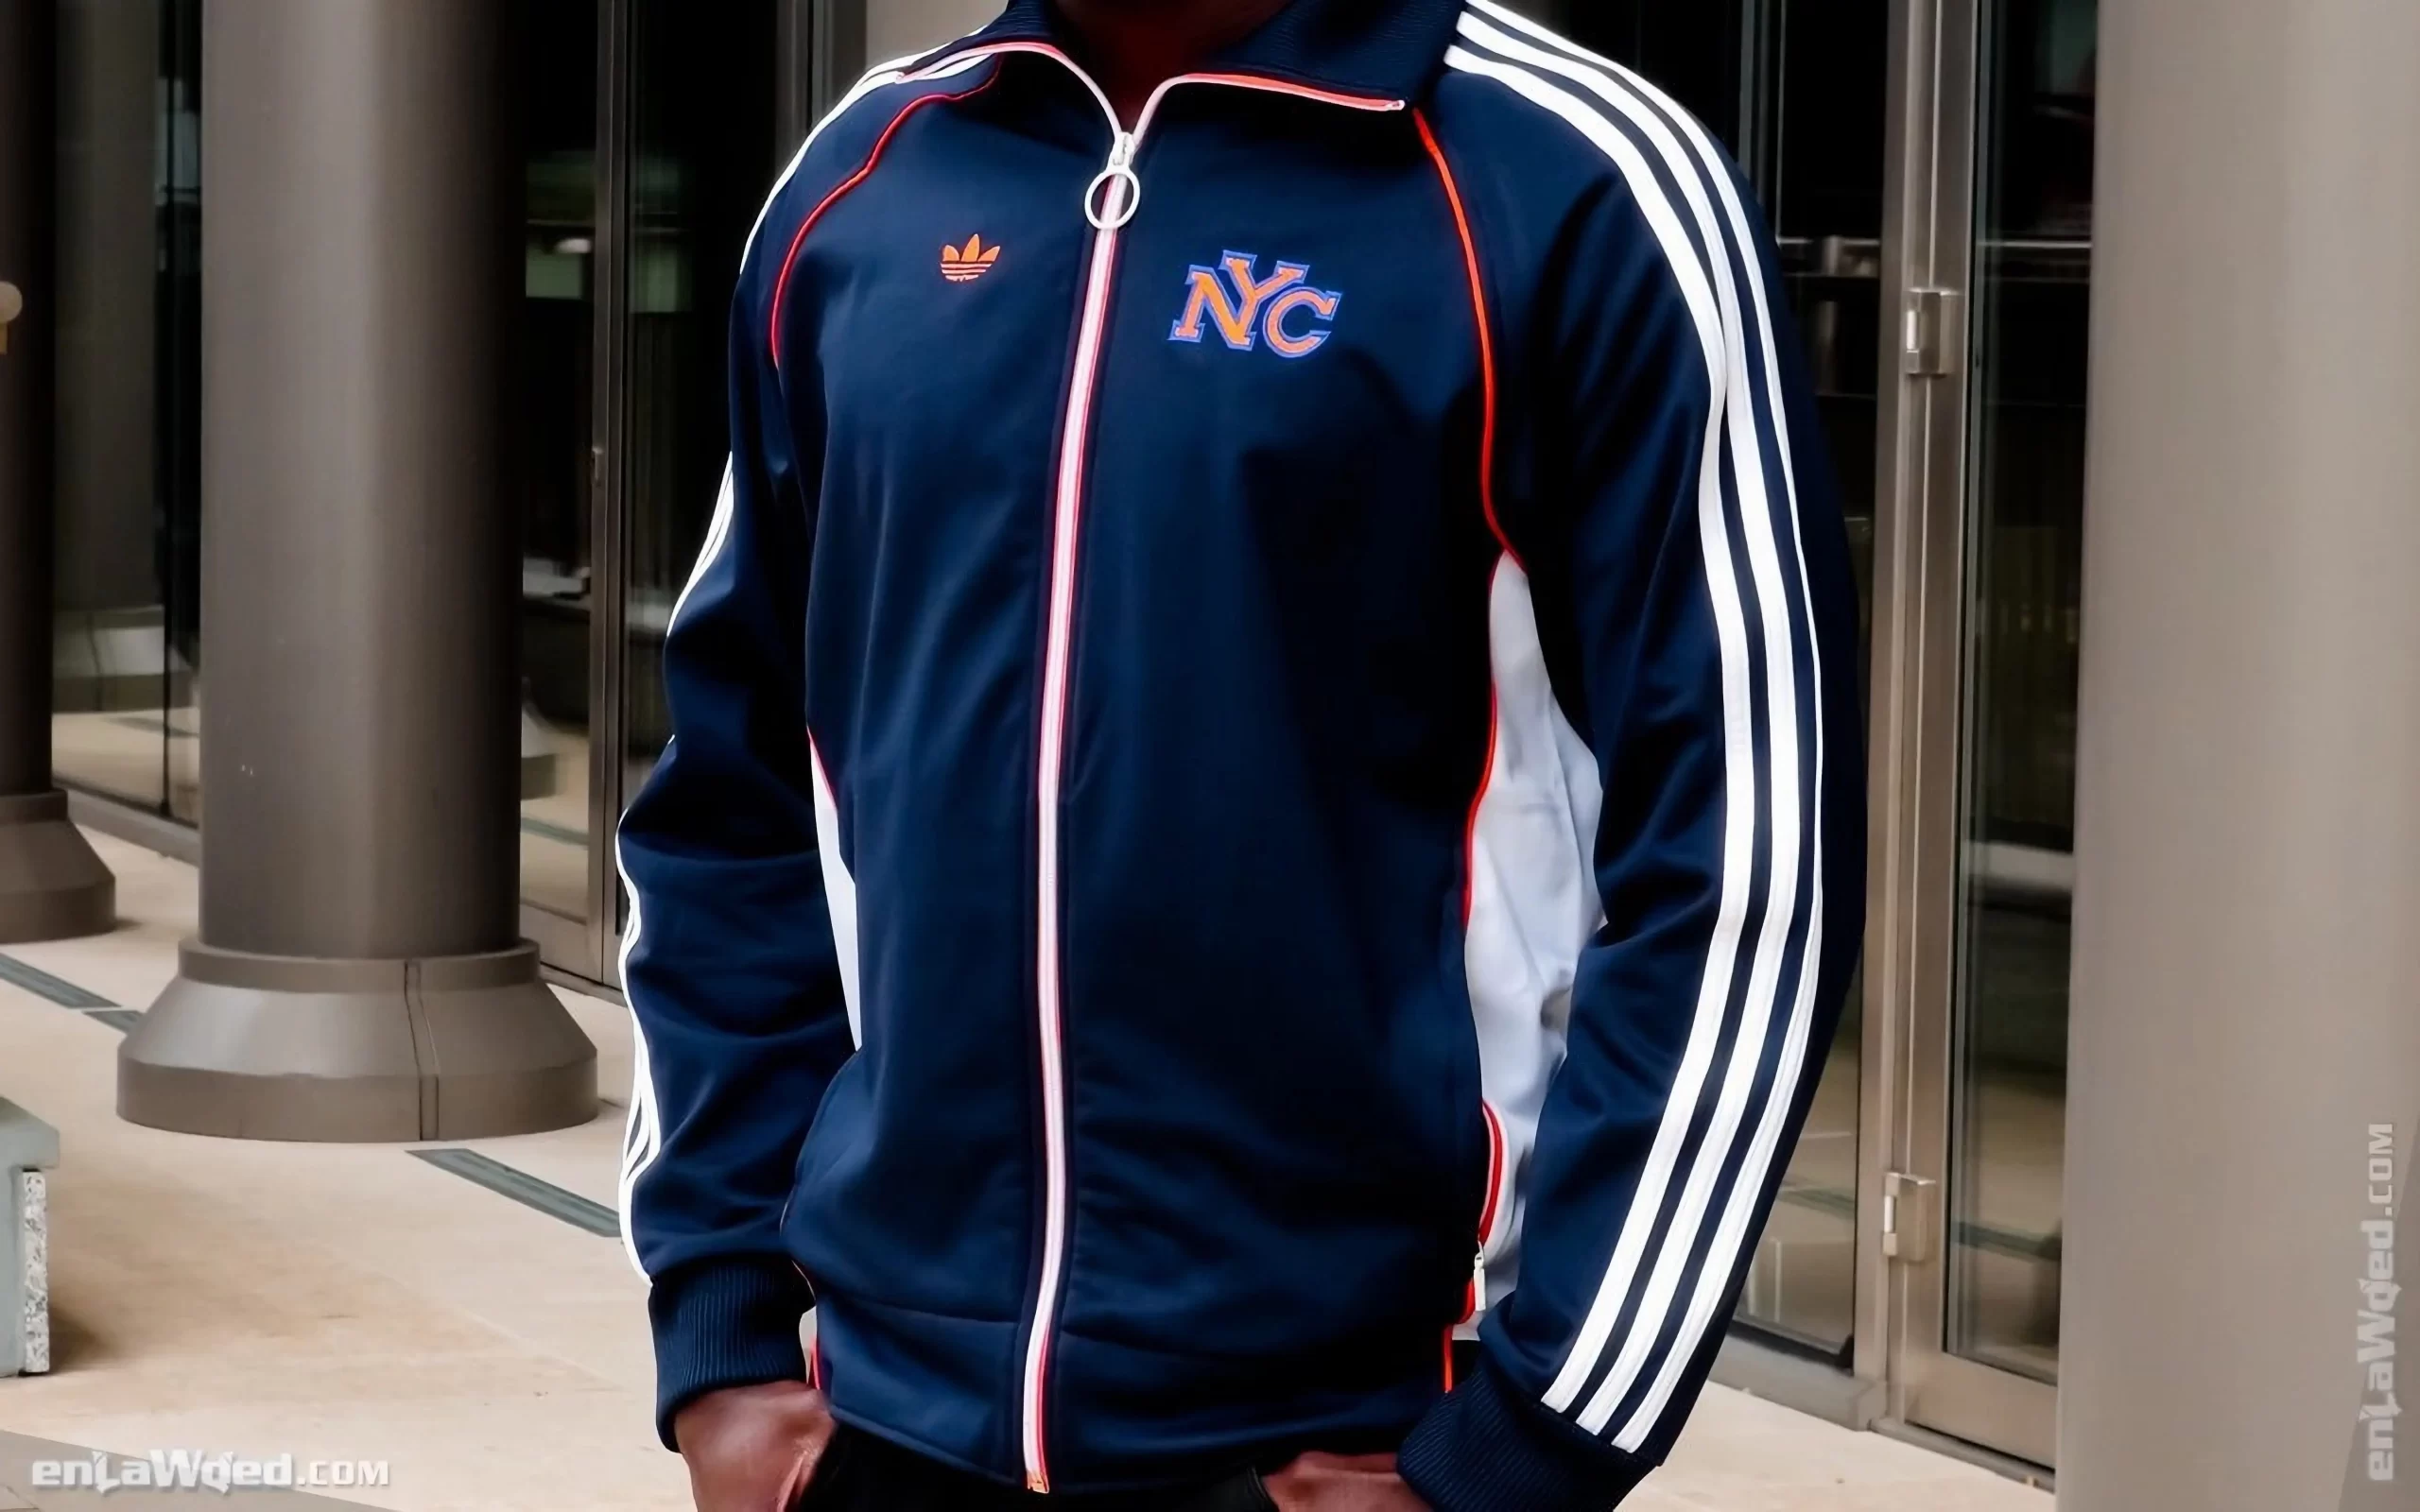 Men’s 2006 New York City Track Top by Adidas Originals: Backed (EnLawded.com file #lmchk90407ip2y123201kg9st)